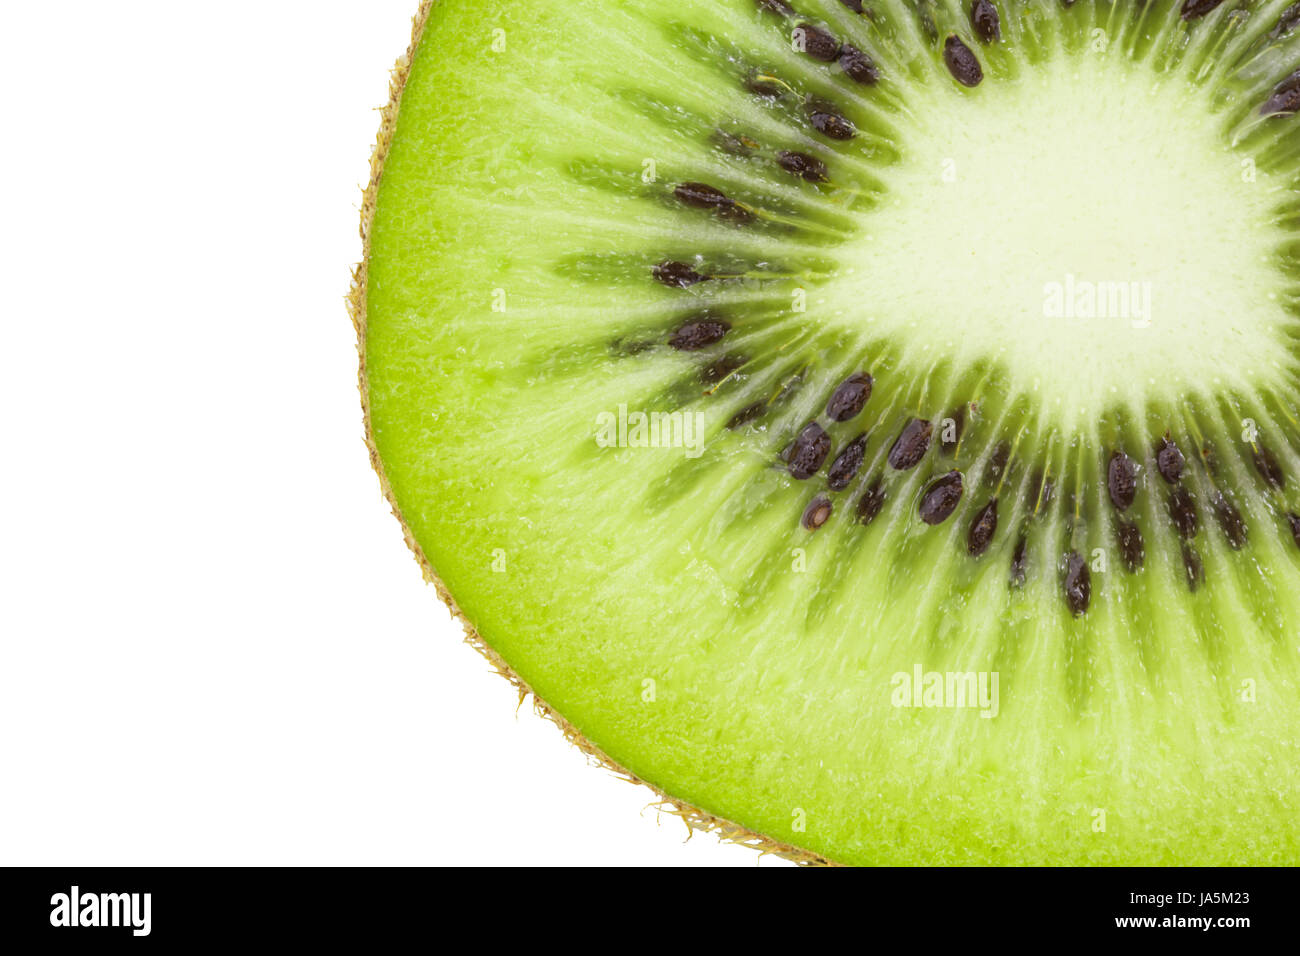 food, aliment, eco, isolated, green, fruit, disc, nectar, dainty, juice, Stock Photo